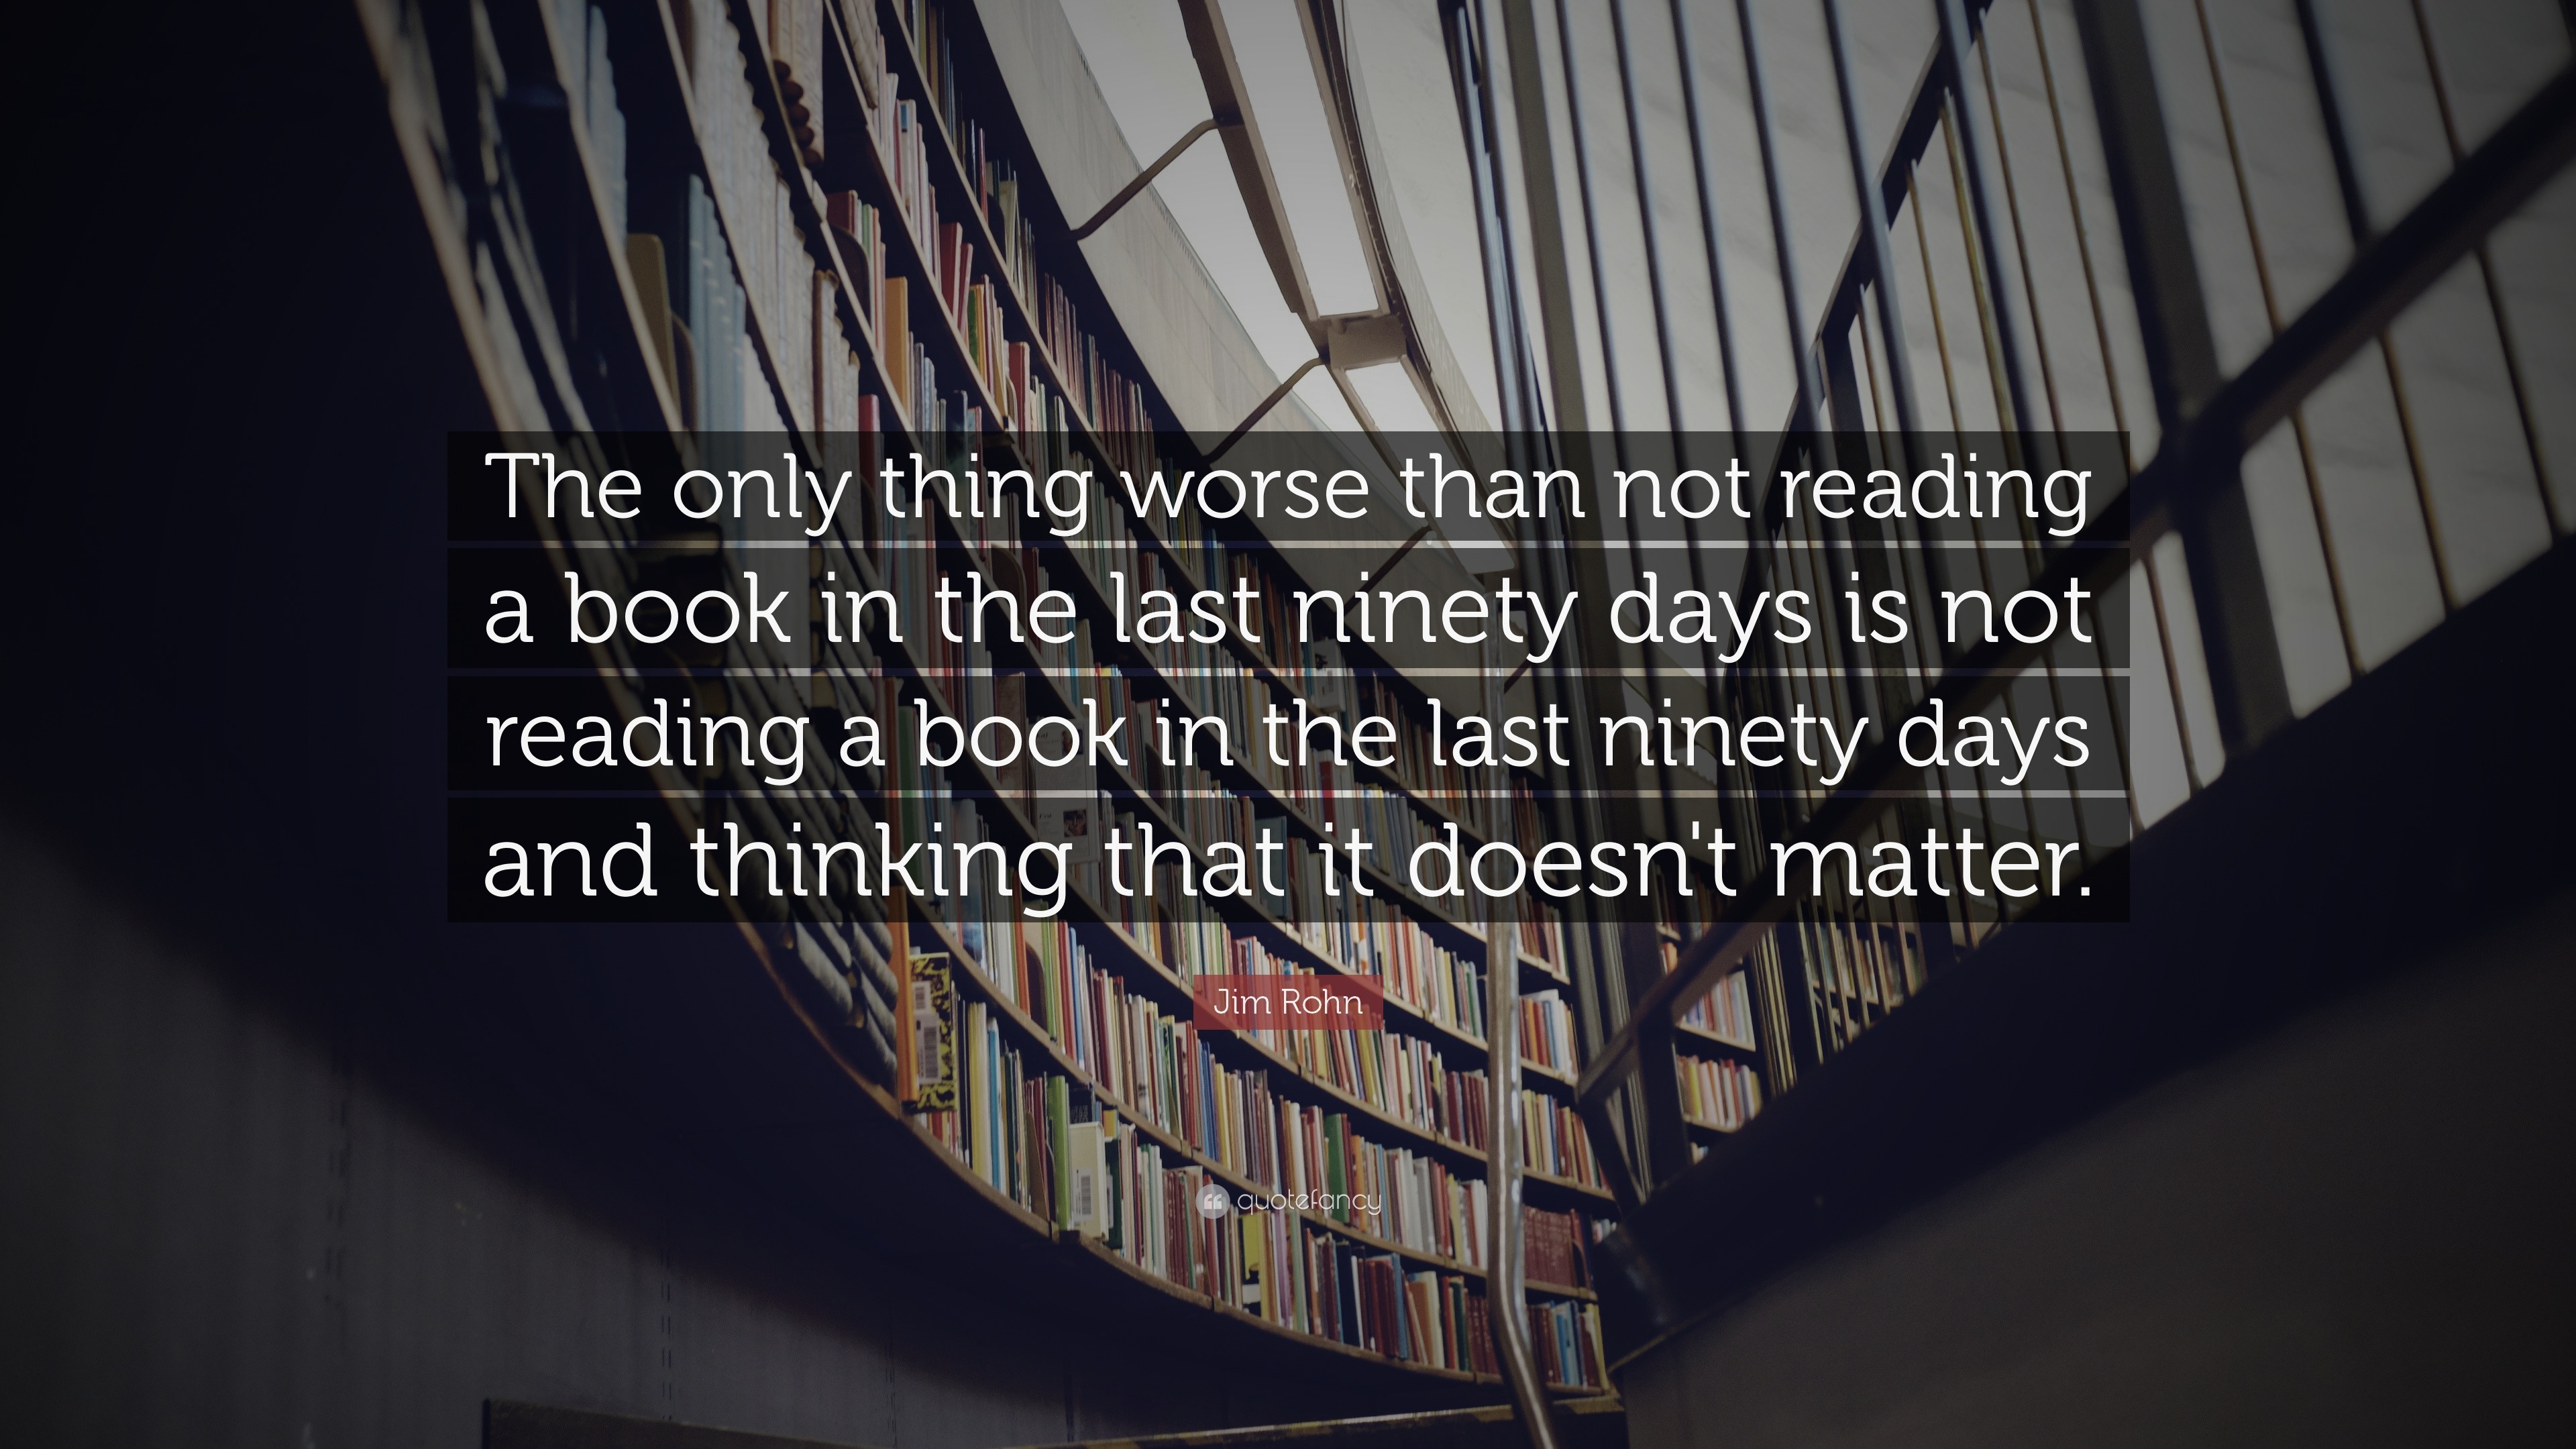 A Mind is a Terrible Thing to Read by William Rabkin